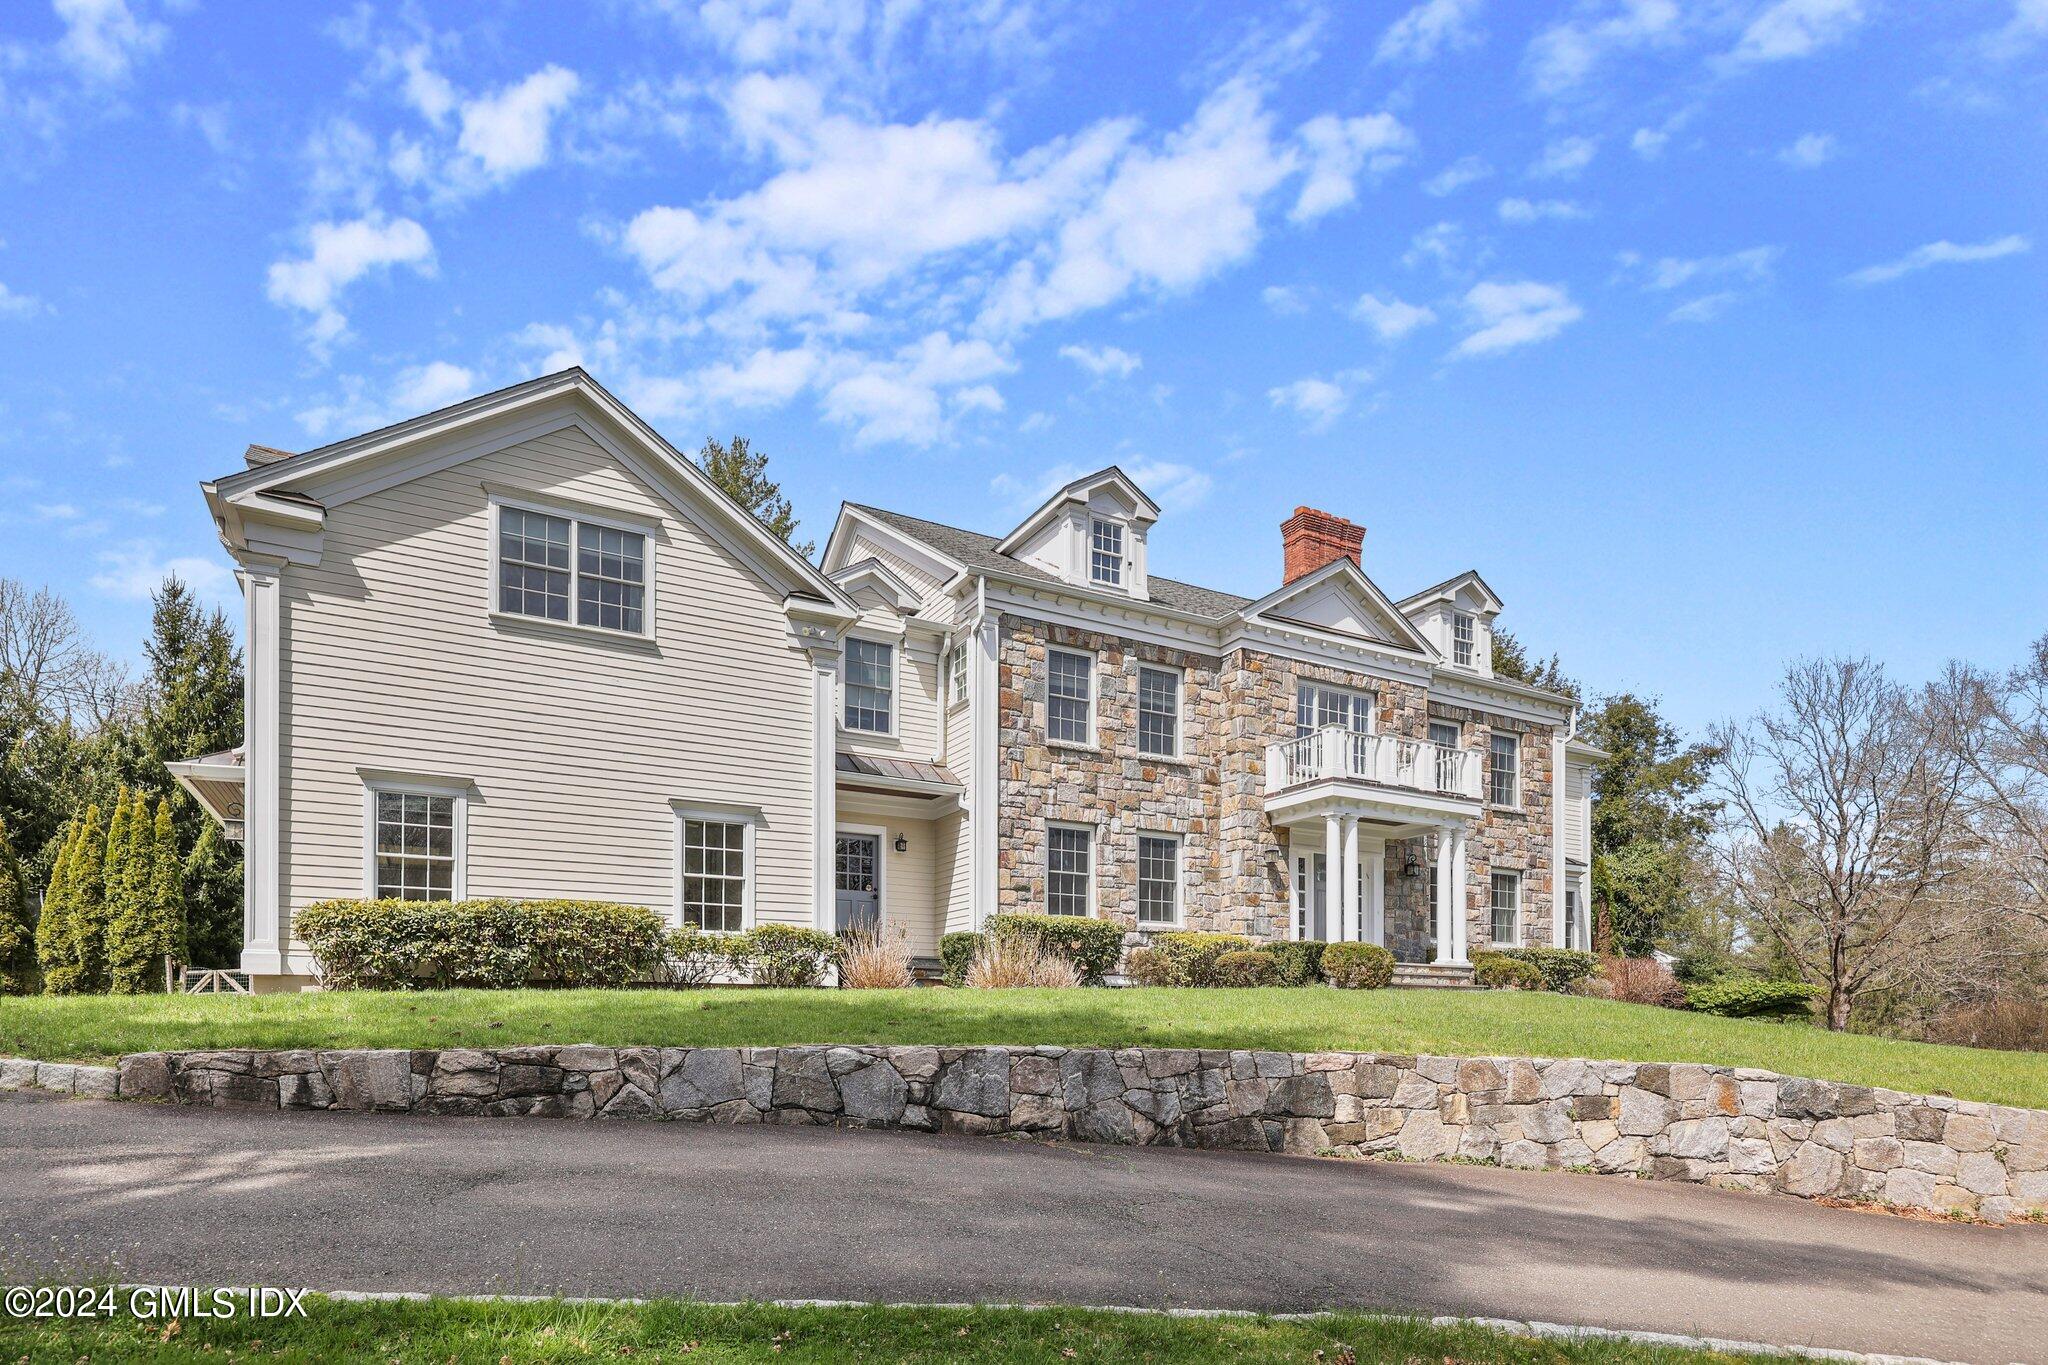 6 Coachlamp Lane, Greenwich, Connecticut - 5 Bedrooms  
6.5 Bathrooms - 